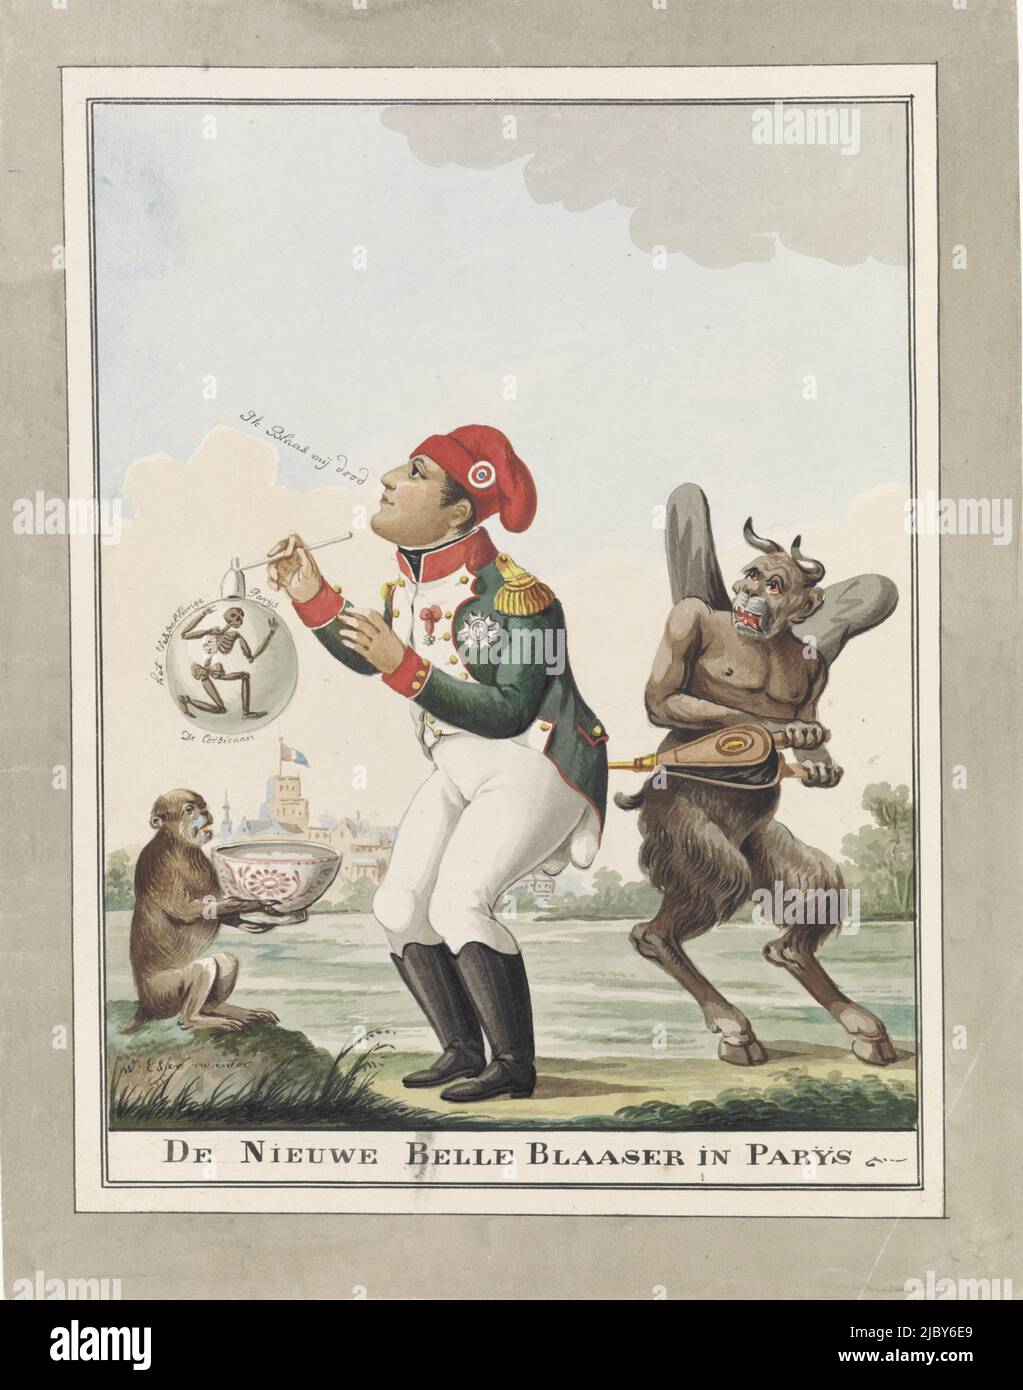 Napoleon as bubble-blower, 1815, Wijnand Esser, 1815, Cartoon on Napoleon's fruitless attempts to win over the city on his return to Paris after his loss at Waterloo on June 18, 1815. Napoleon wearing a Jacobin hat, blowing a bubble within which death like a skeleton. On the right the devil blows into him with a bellows, on the left a monkey holding out the soap suds., draughtsman: Wijnand Esser, (mentioned on object), Netherlands, 1815, paper, pen, brush, h 333 mm × w 262 mm Stock Photo